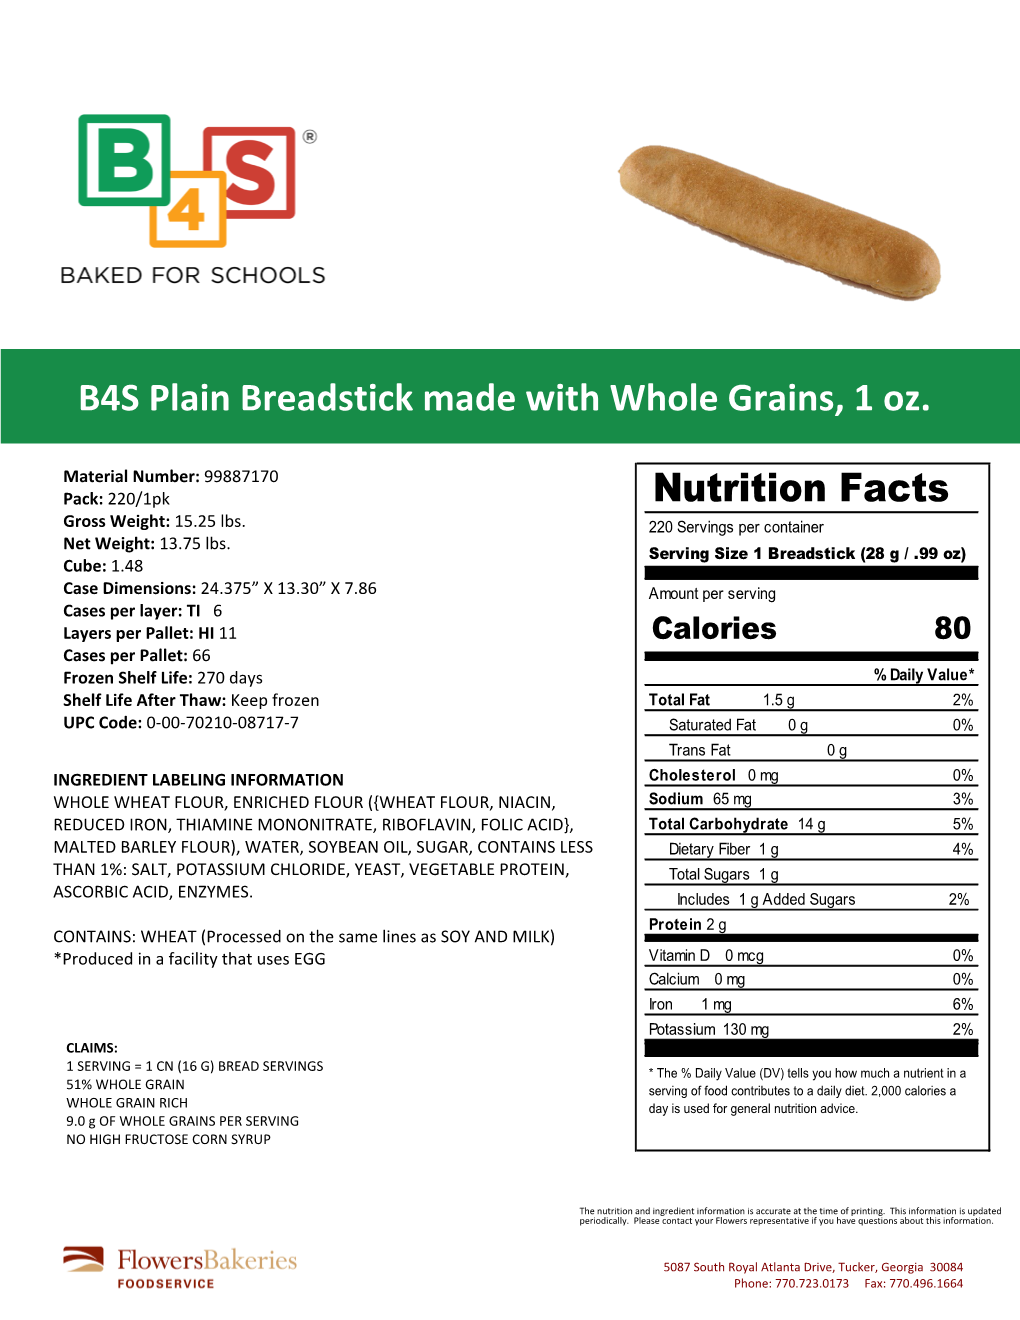 B4S Plain Breadstick Made with Whole Grains, 1 Oz